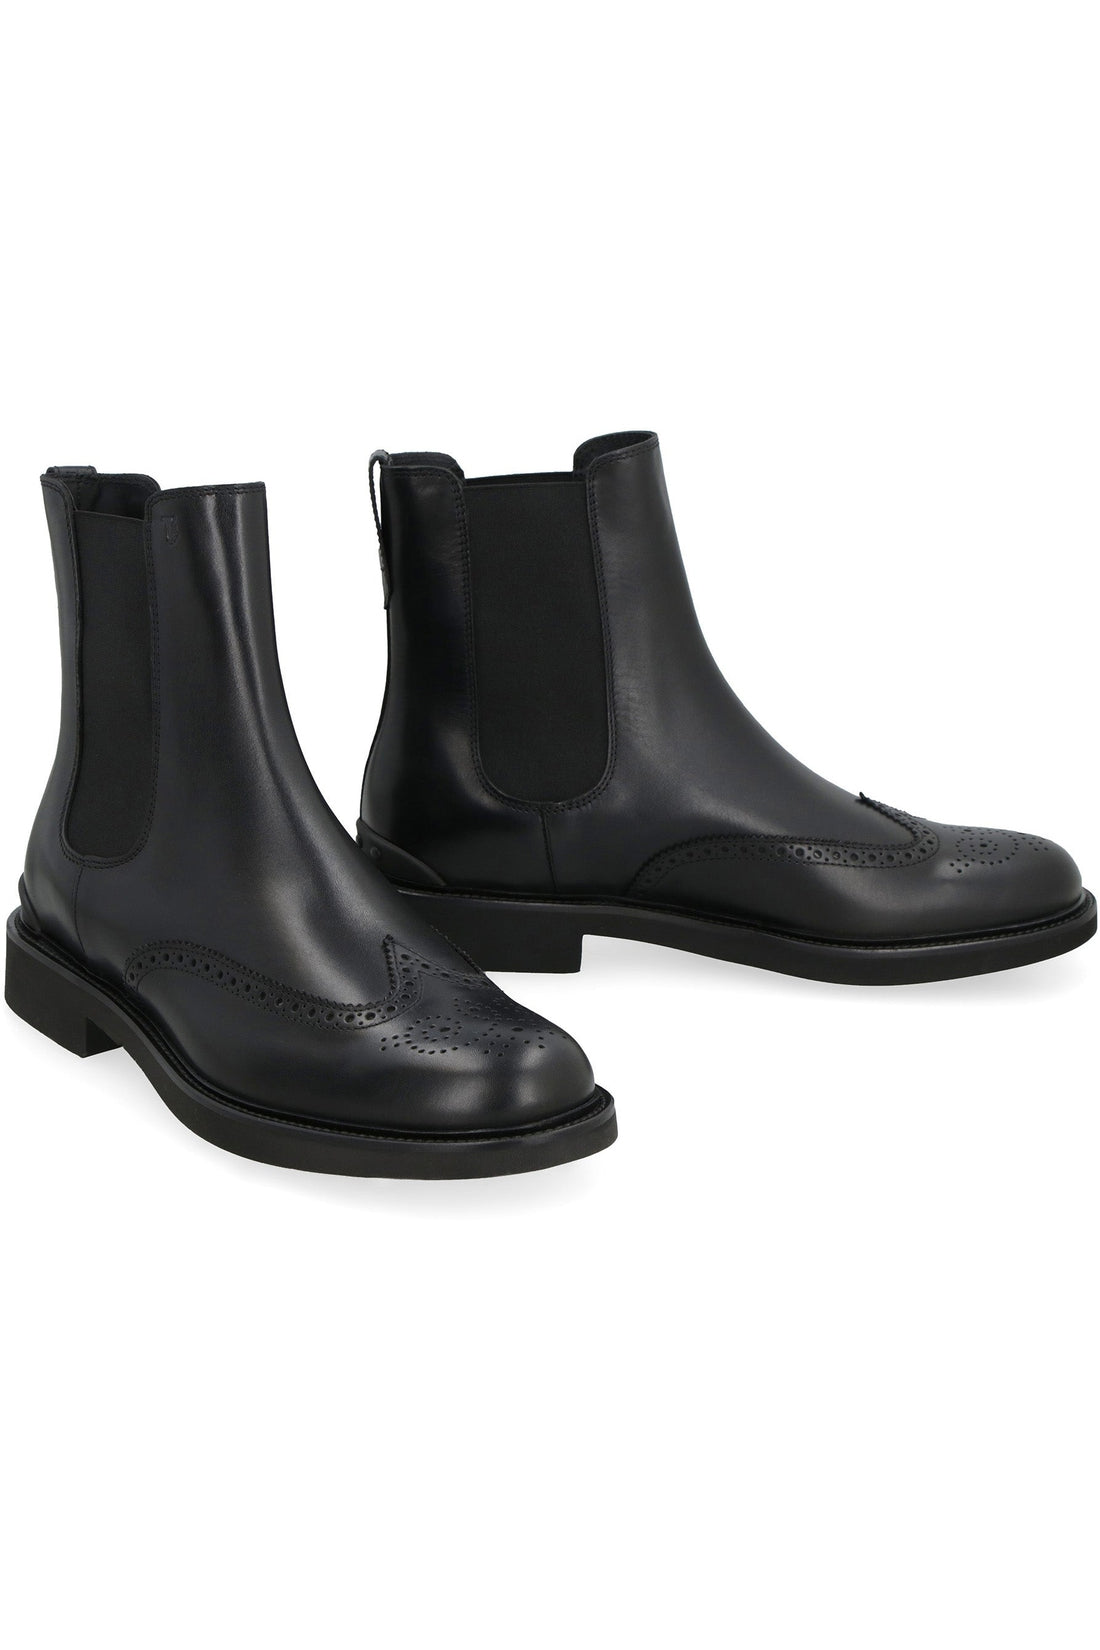 Tod's-OUTLET-SALE-Leather Chelsea-boots-ARCHIVIST